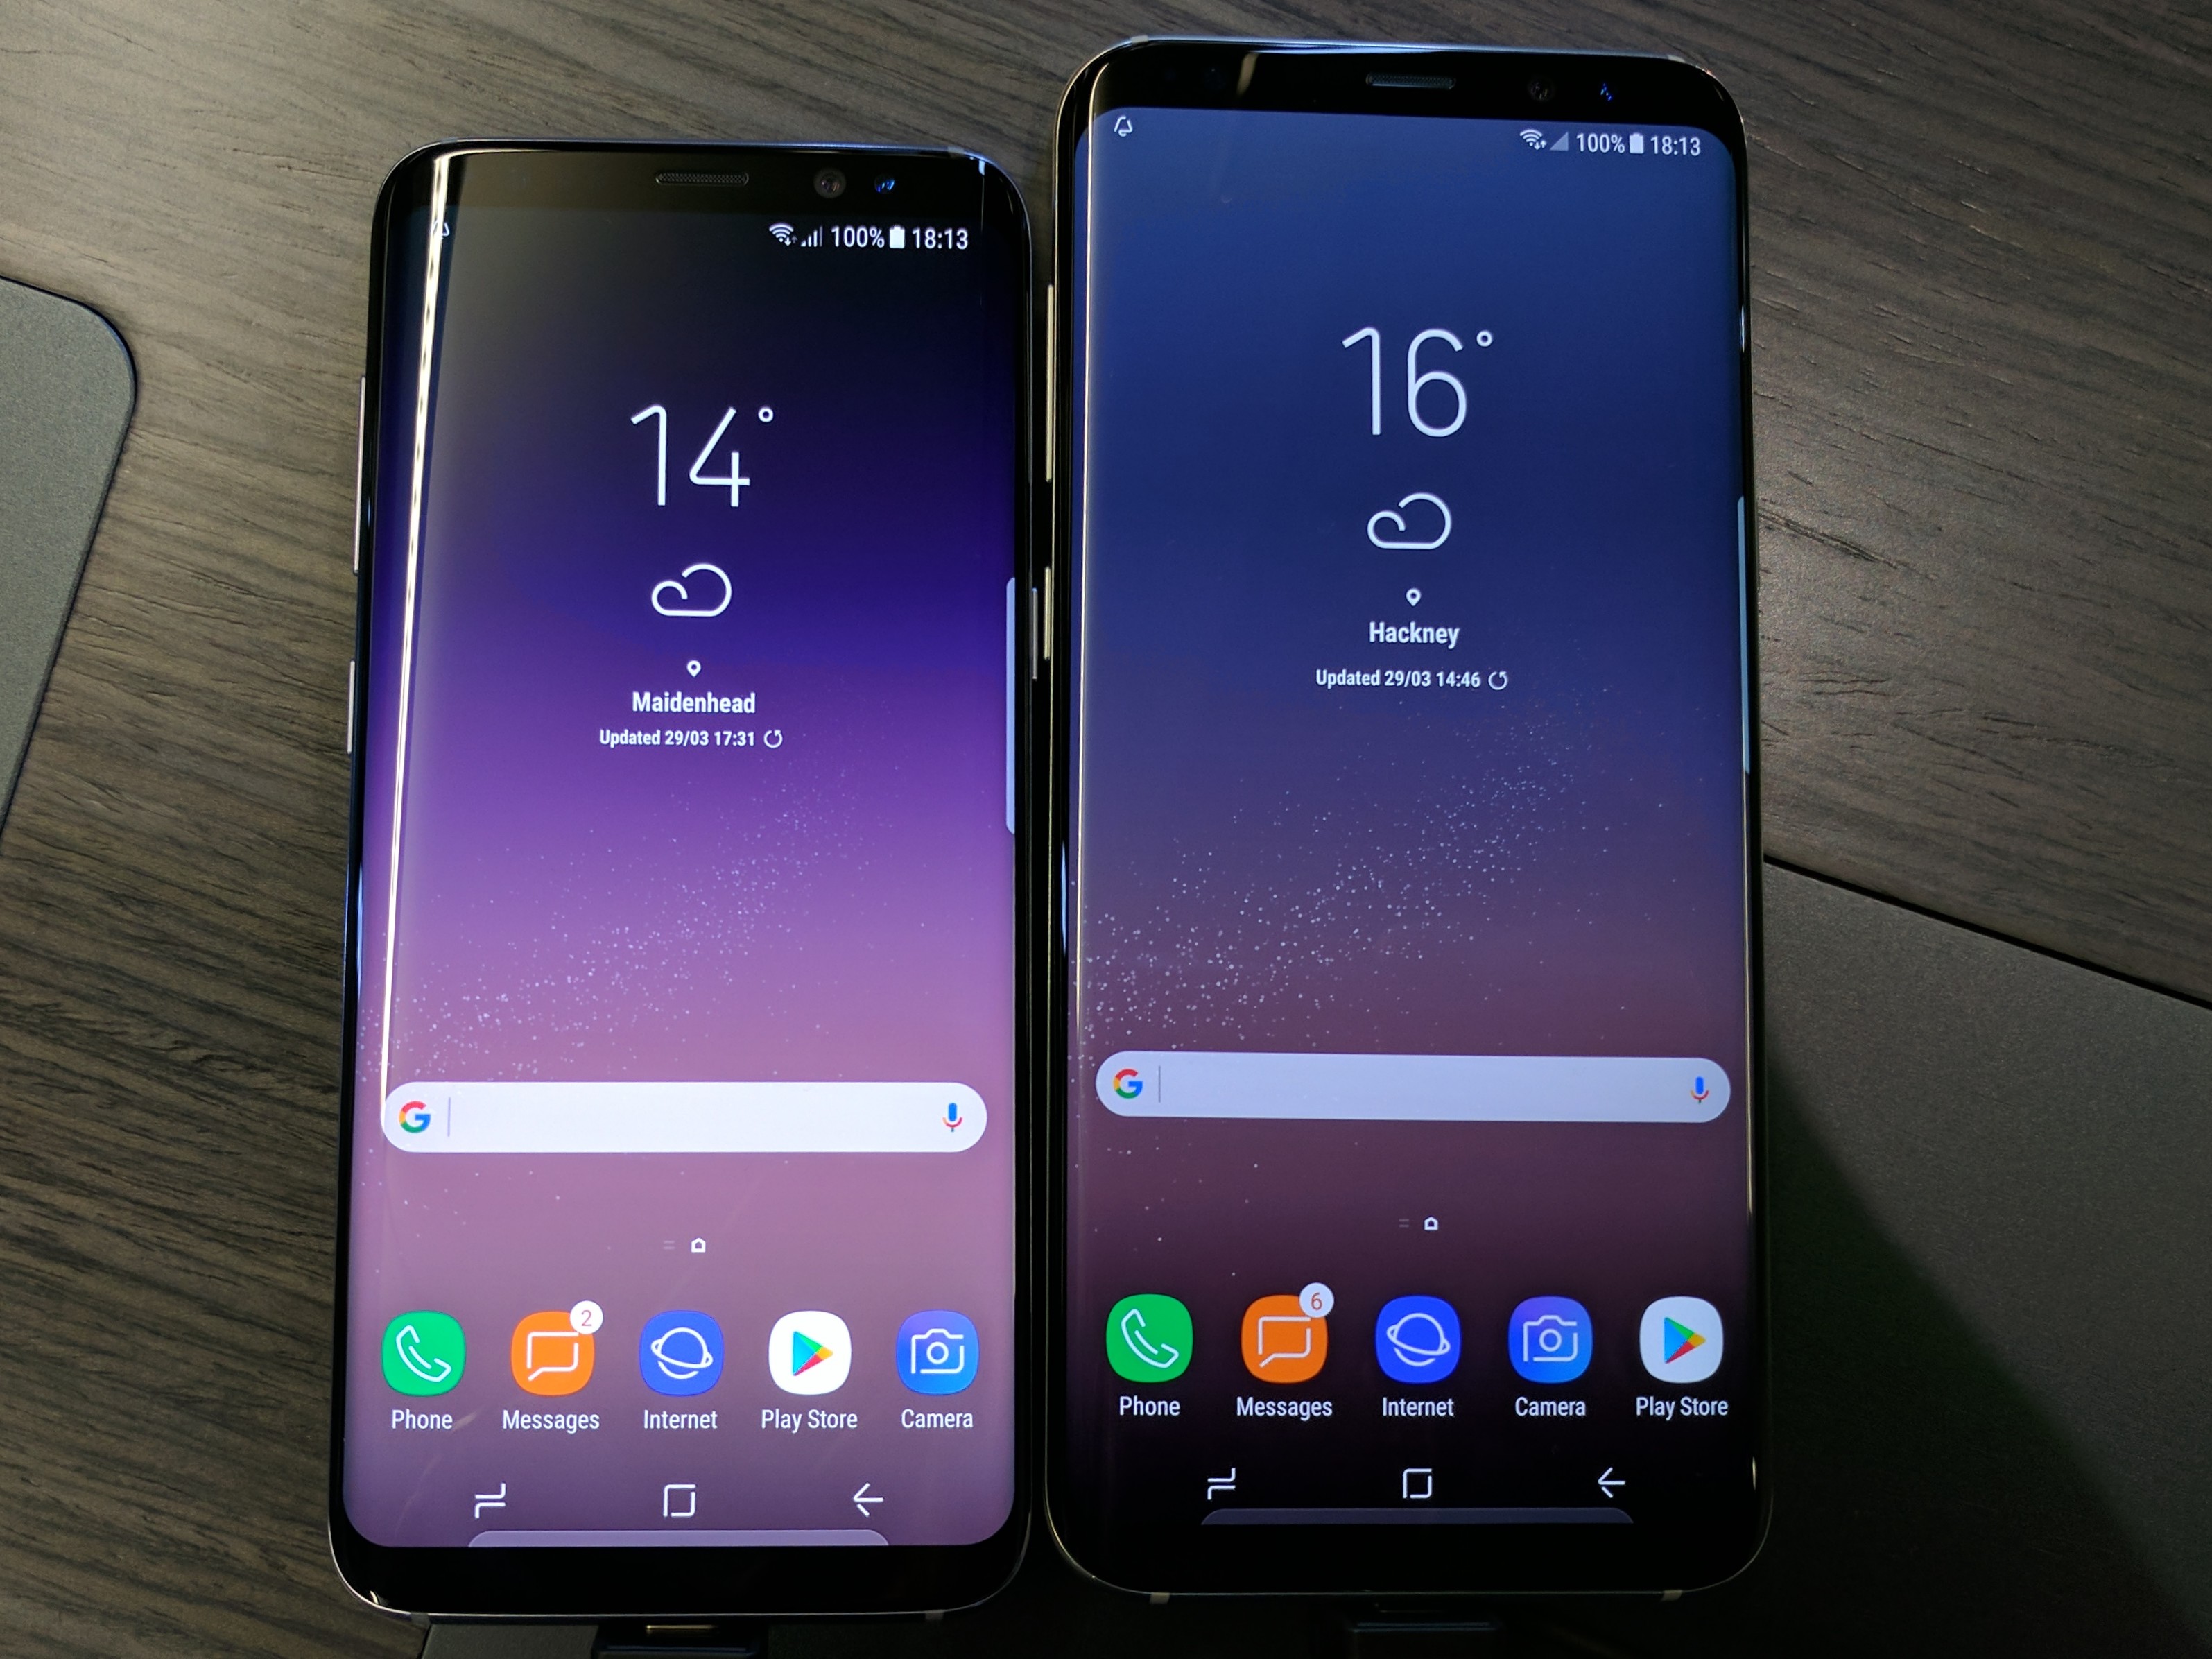 Galaxy S8 manufacturing costs revealed.